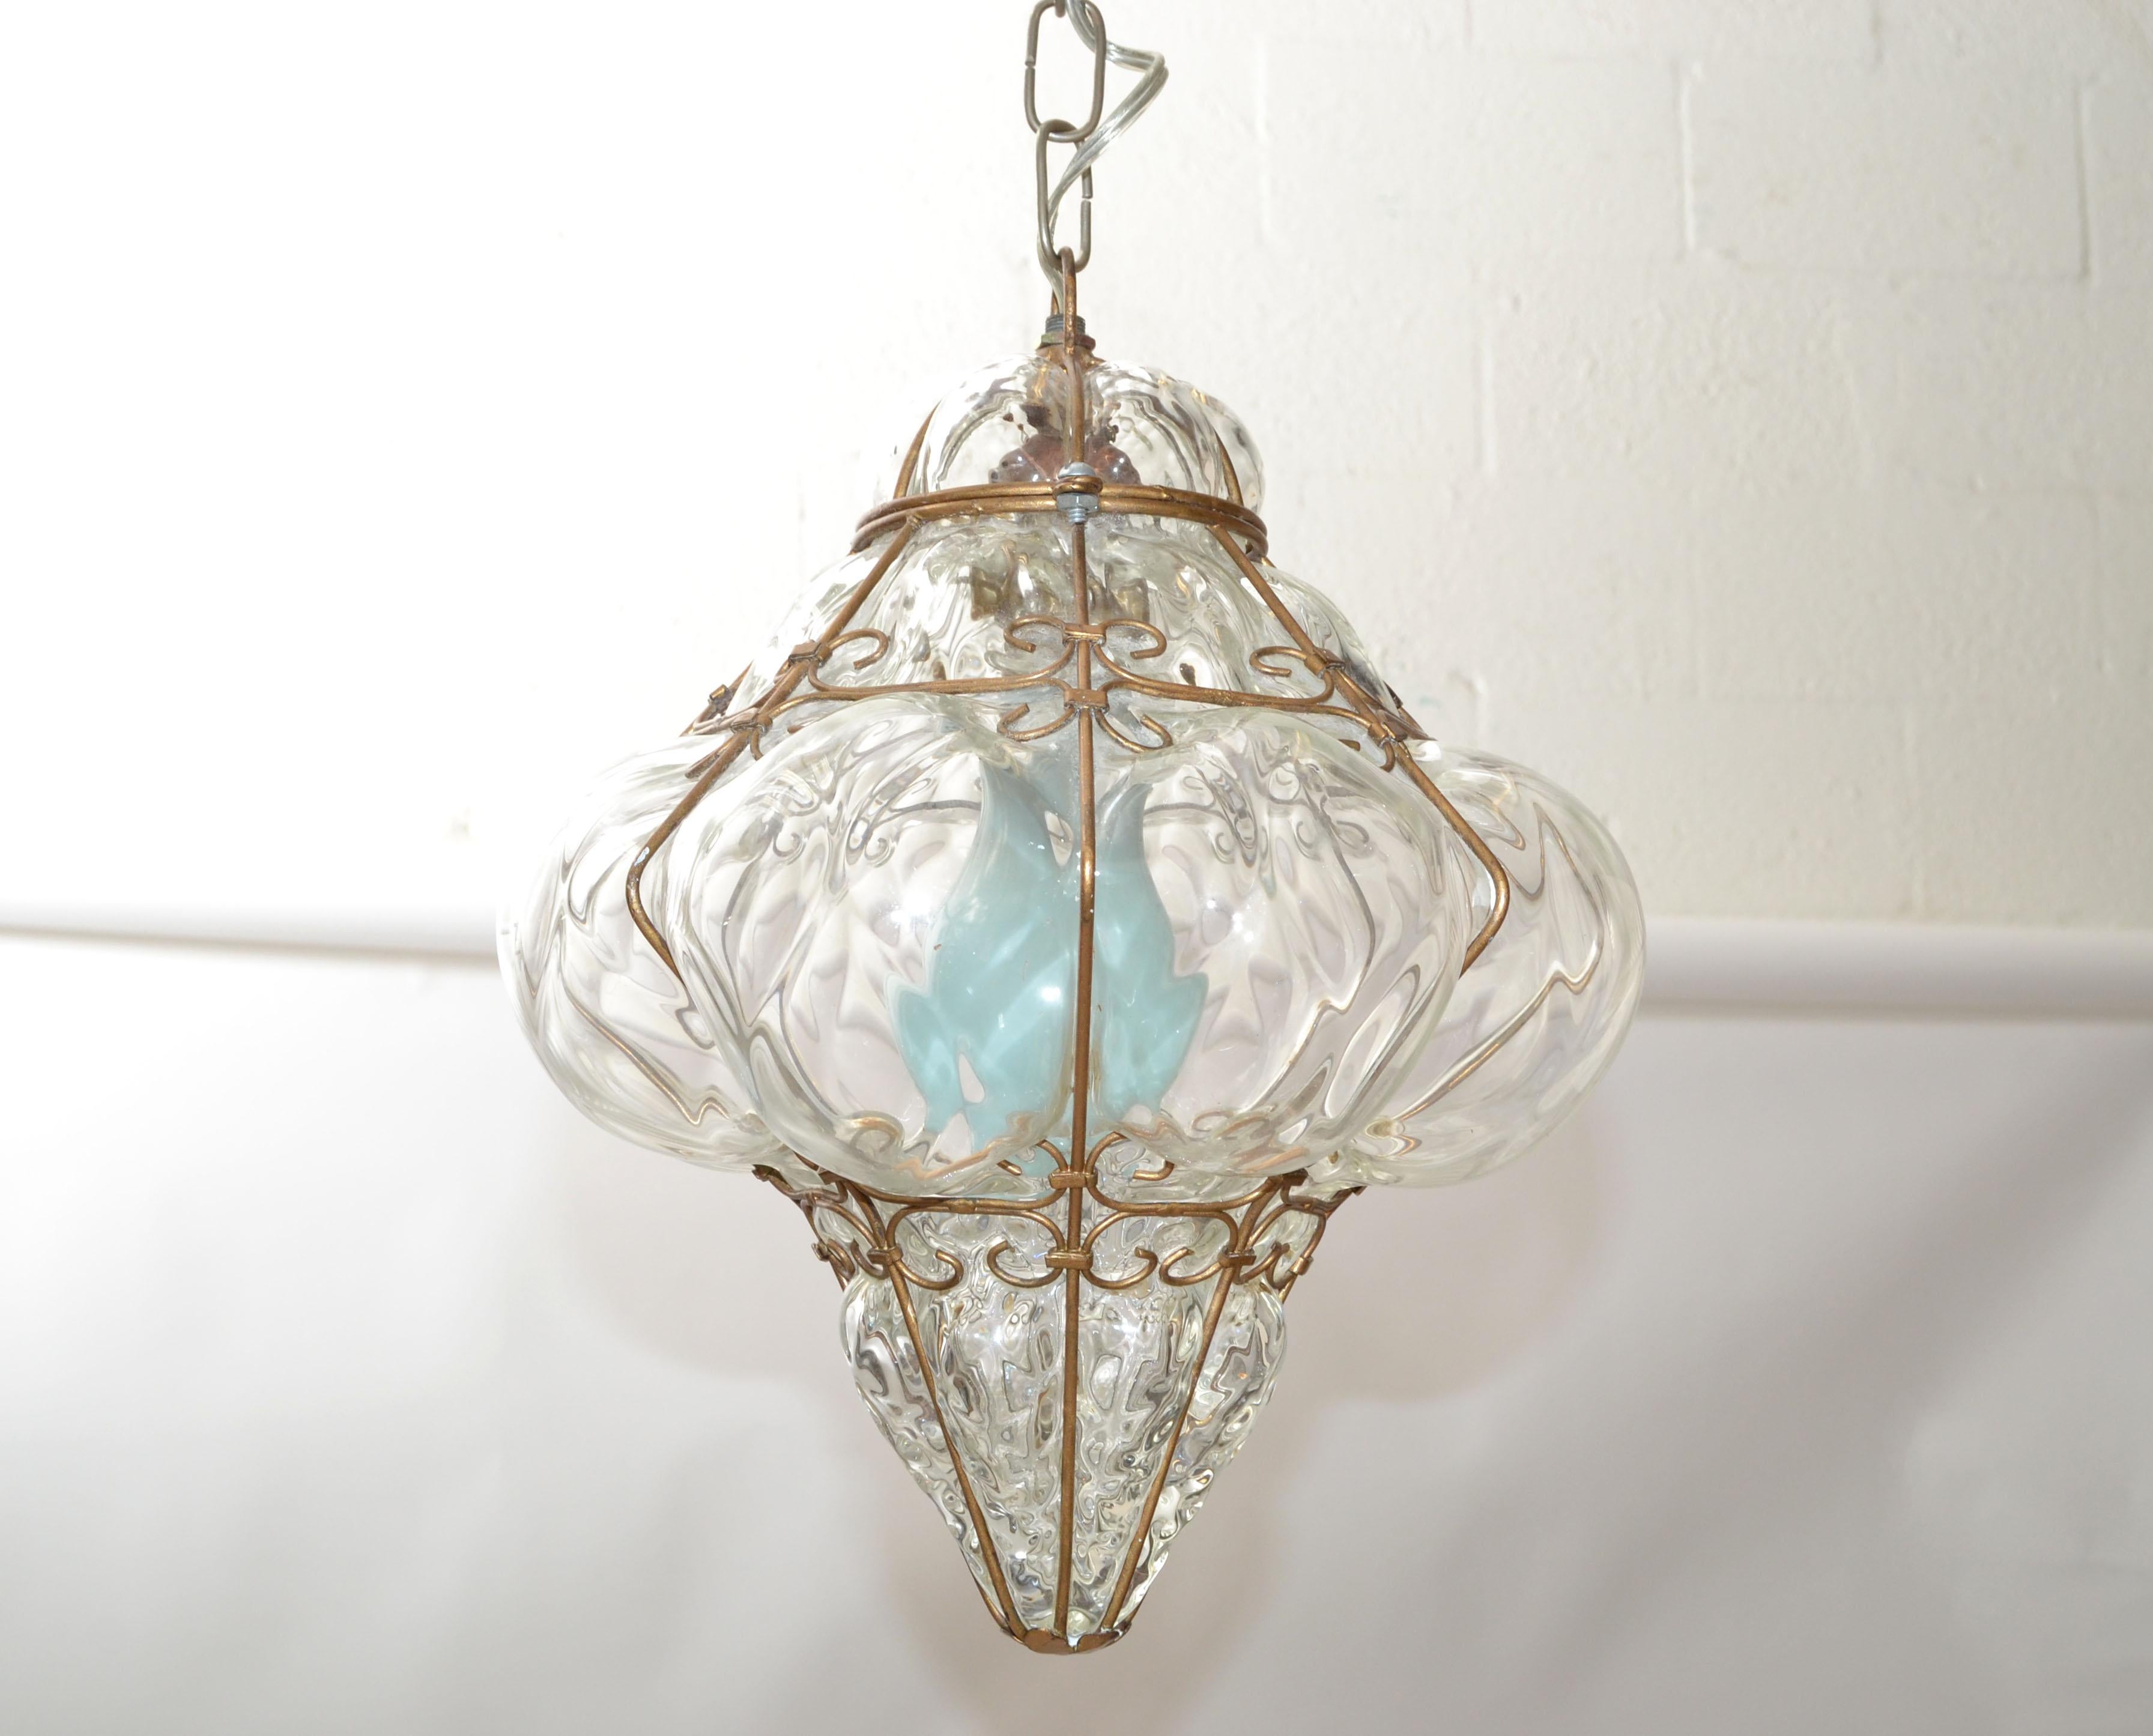 Blown Murano Glass caged pendant lamp, Bubble Glass Lantern made in Italy in the late 1940.
Created to project a patterned light shadow in a smaller transitional space. 
Gold Finished frame and canopy covered with some wear.
Wired for the US,